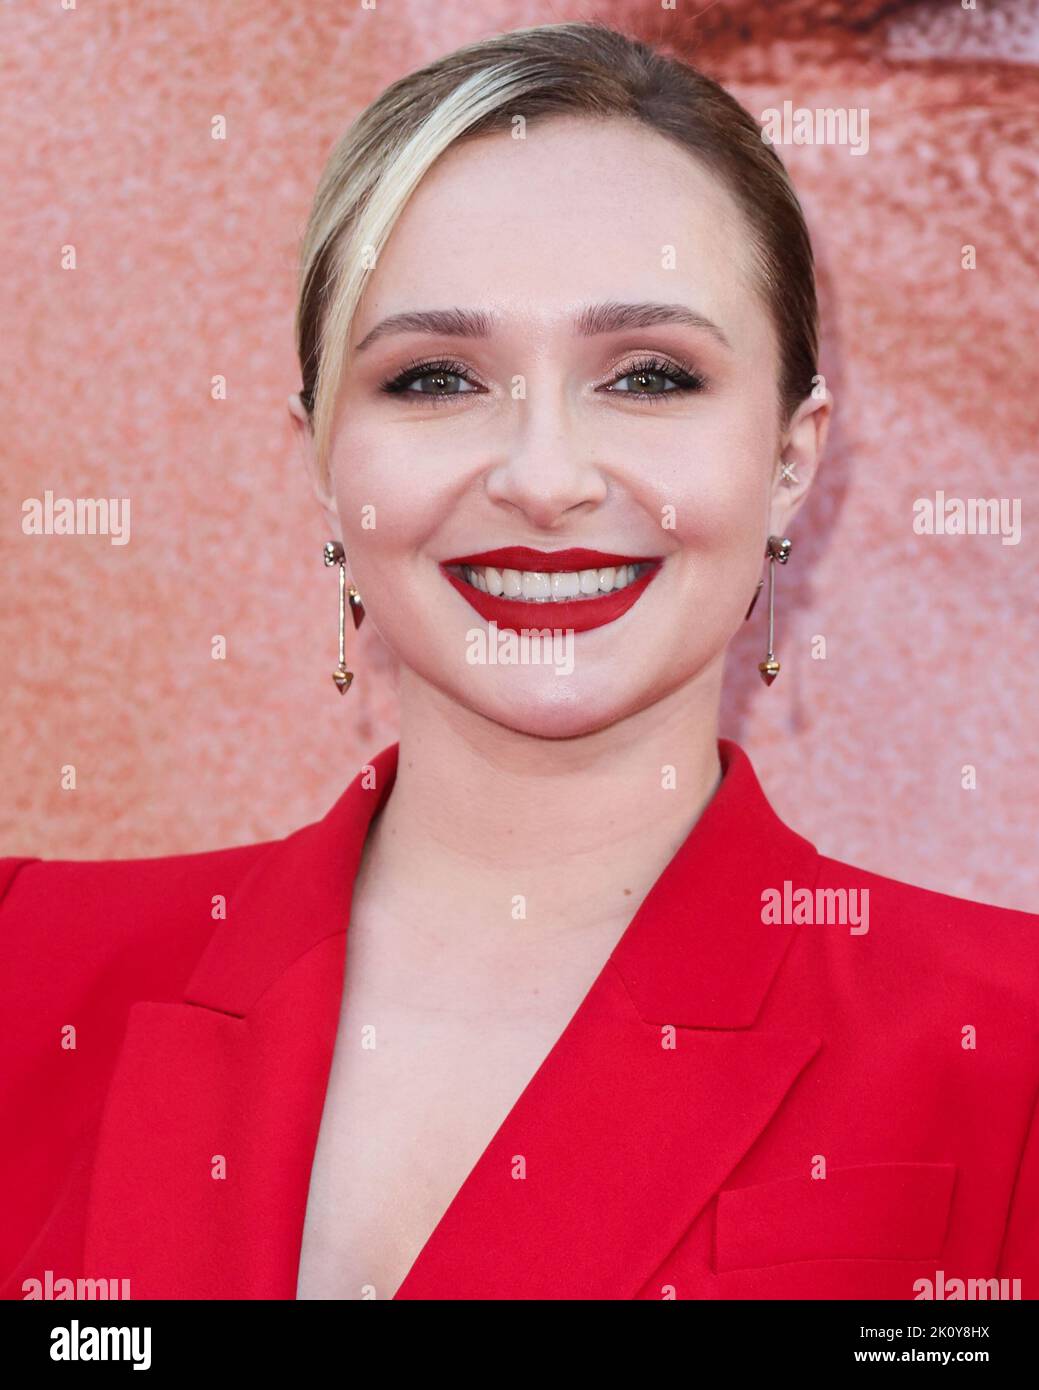 HOLLYWOOD, LOS ANGELES, CALIFORNIA, USA - SEPTEMBER 13: American actress Hayden Panettiere arrives at the Los Angeles Premiere Of Netflix's 'Blonde' held at the TCL Chinese Theatre IMAX on September 13, 2022 in Hollywood, Los Angeles, California, United States. (Photo by Xavier Collin/Image Press Agency) Stock Photo